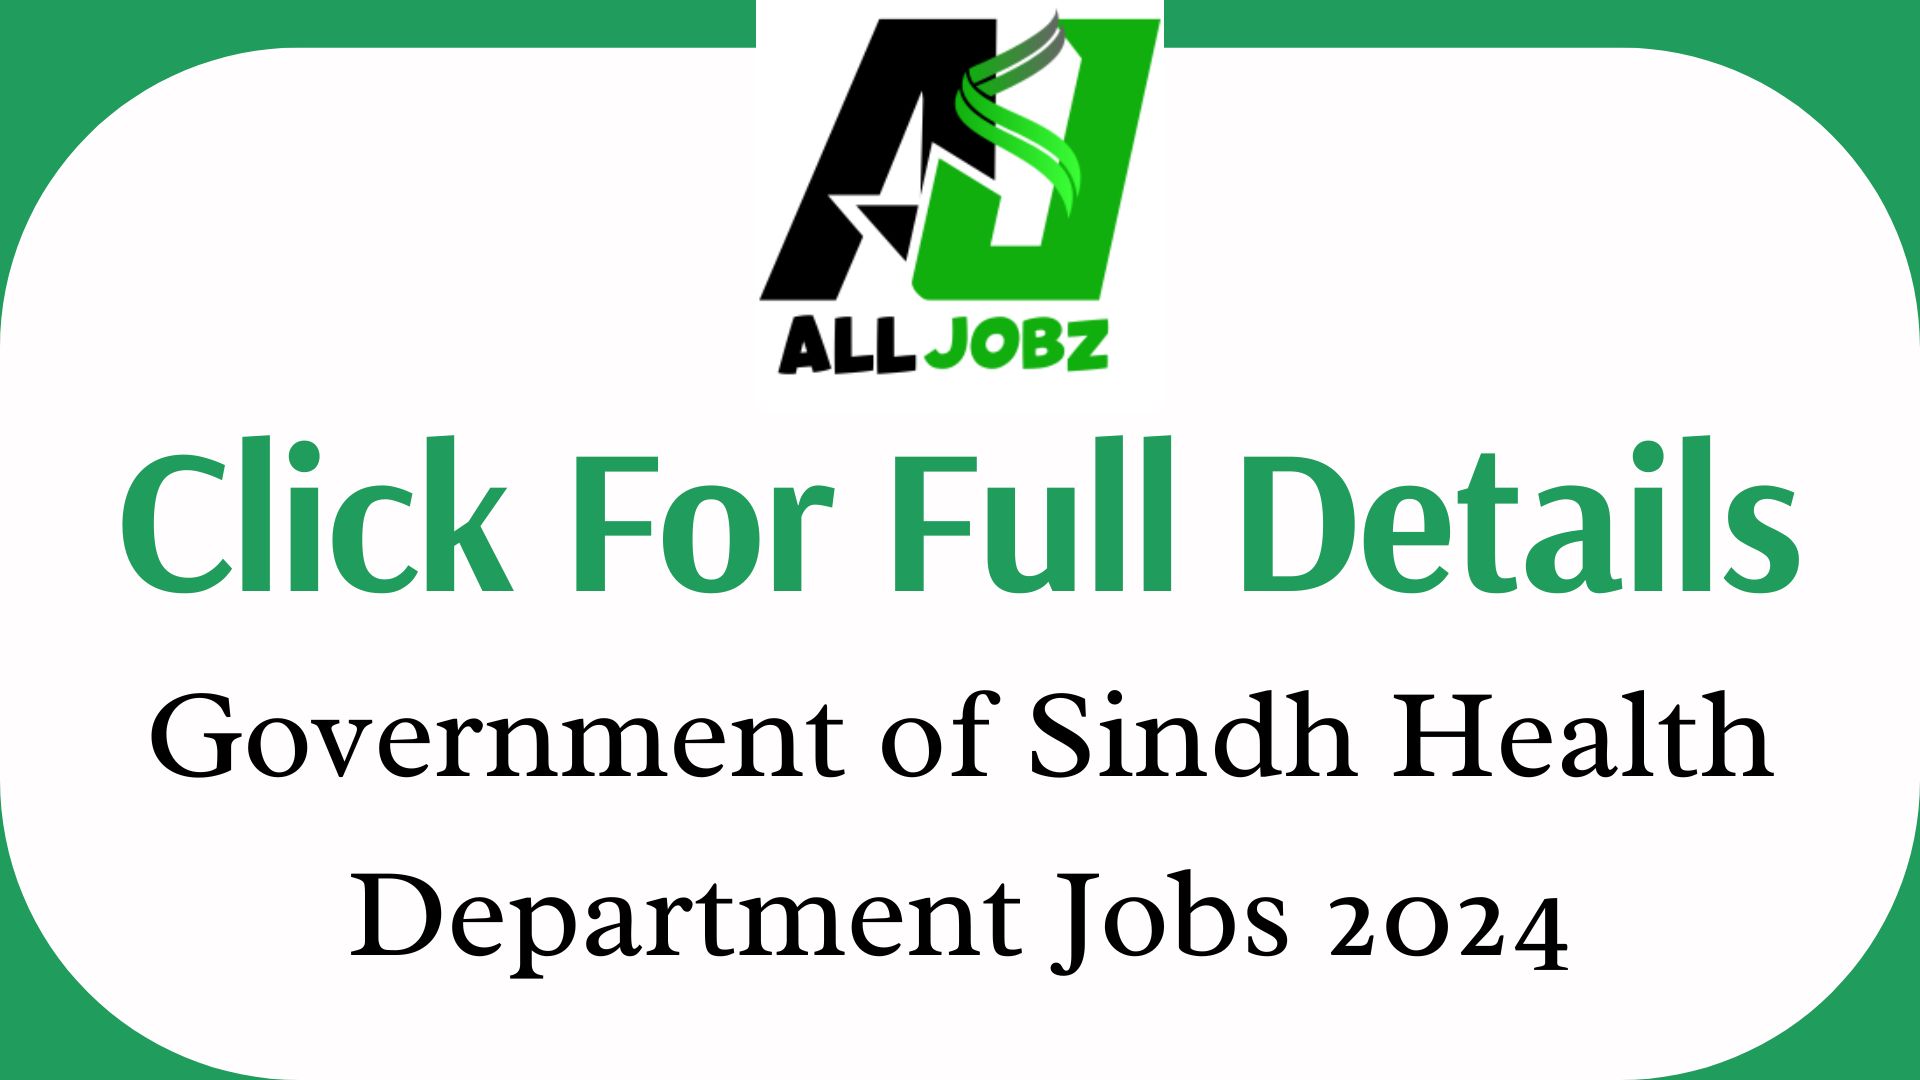 Government Of Sindh Health Department Jobs Online Apply, Government Of Sindh Health Department Jobs 2024, Sindh Health Department Jobs 2024 Online Apply, Health Department Jobs Online Apply, Sindh Health Department Notification, Health Department Sindh, Health Department Jobs Karachi, Sindh Government Jobs All Department,